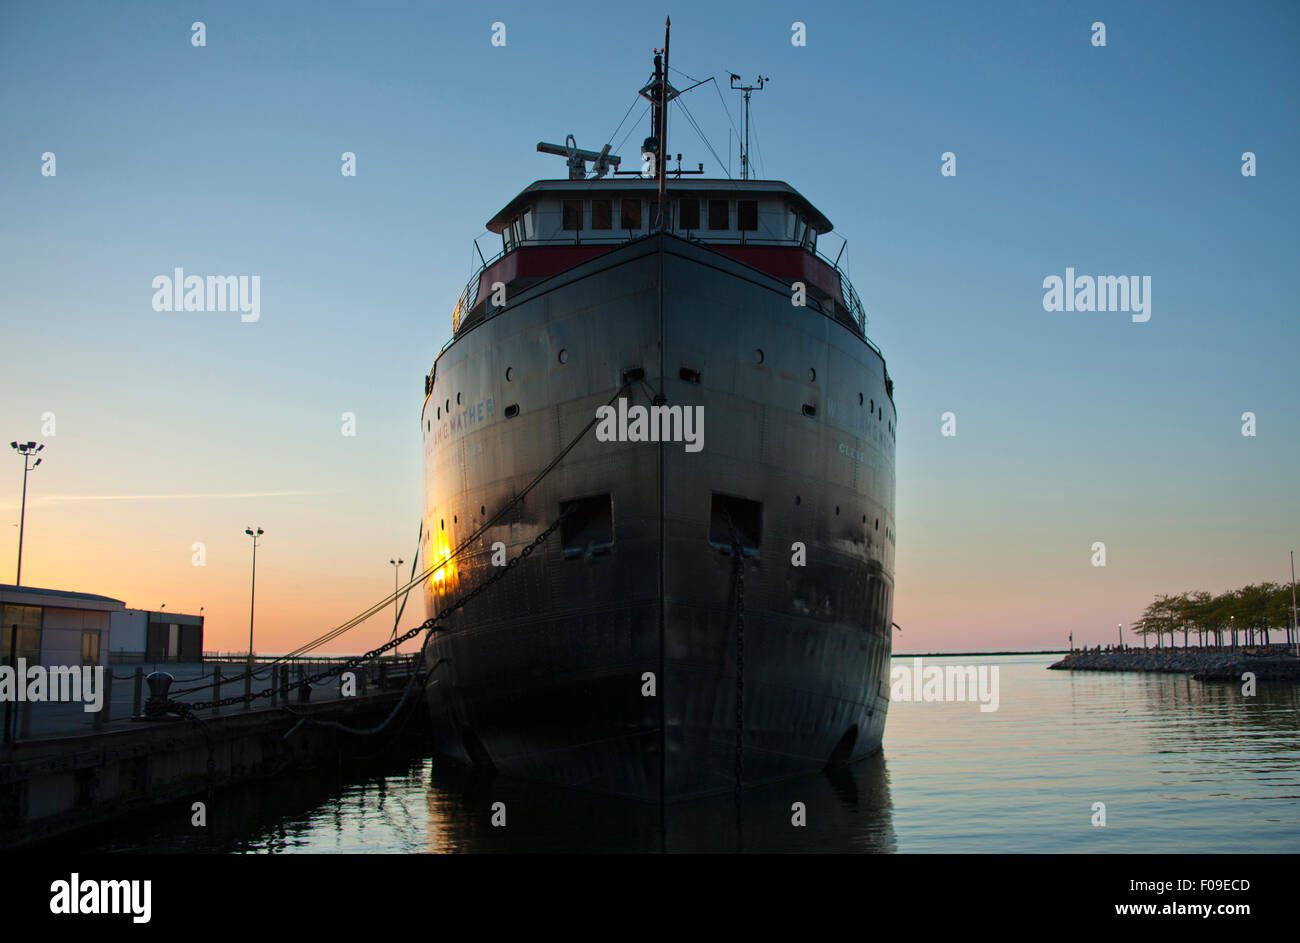 STEAMSHIP WILLIAM G. MATHER LAKE FREIGHTER MUSEUM WATERFRONT QUAY DOWNTOWN CLEVELAND OHIO USA Stock Photo